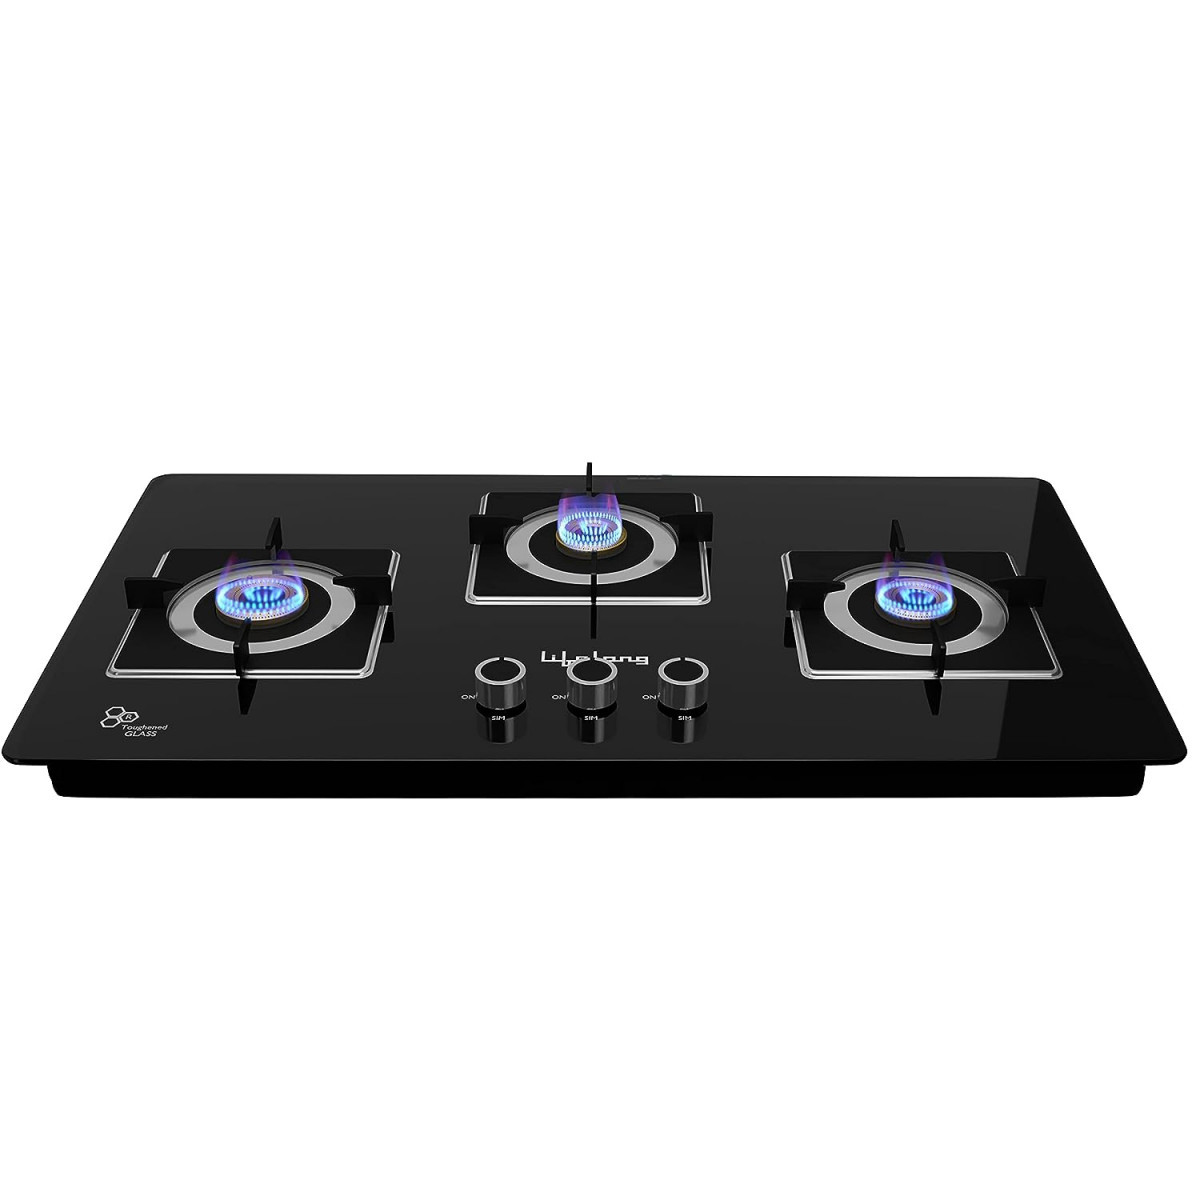 Lifelong 3 Gas Burner Top - 3 Burners Hob Top Gas Stove with Manual Ignition - Toughened Glass top Gas Stoves for Home  Kitchen - Manual Gas stove for modernmodular kitchen Lexus LLHT003